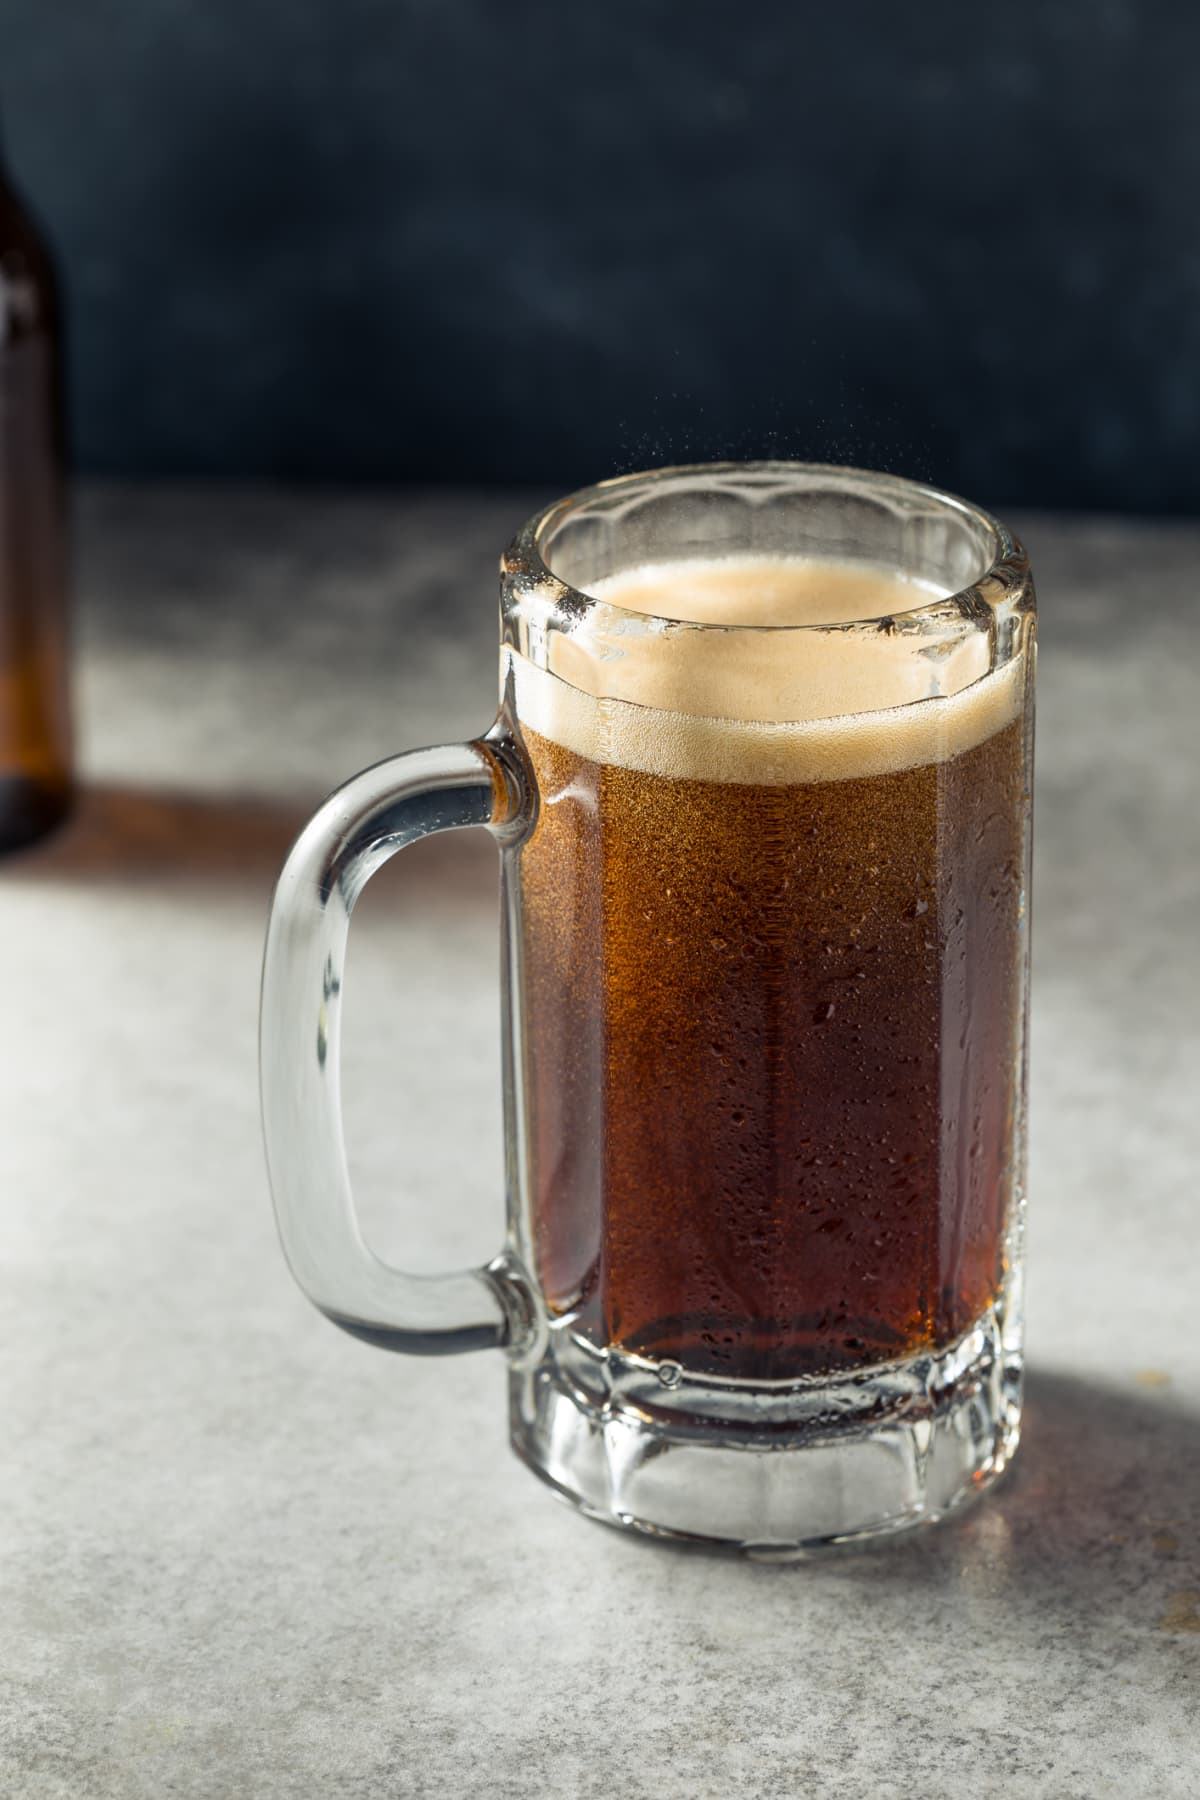 Root beer in a glass on a gray surface